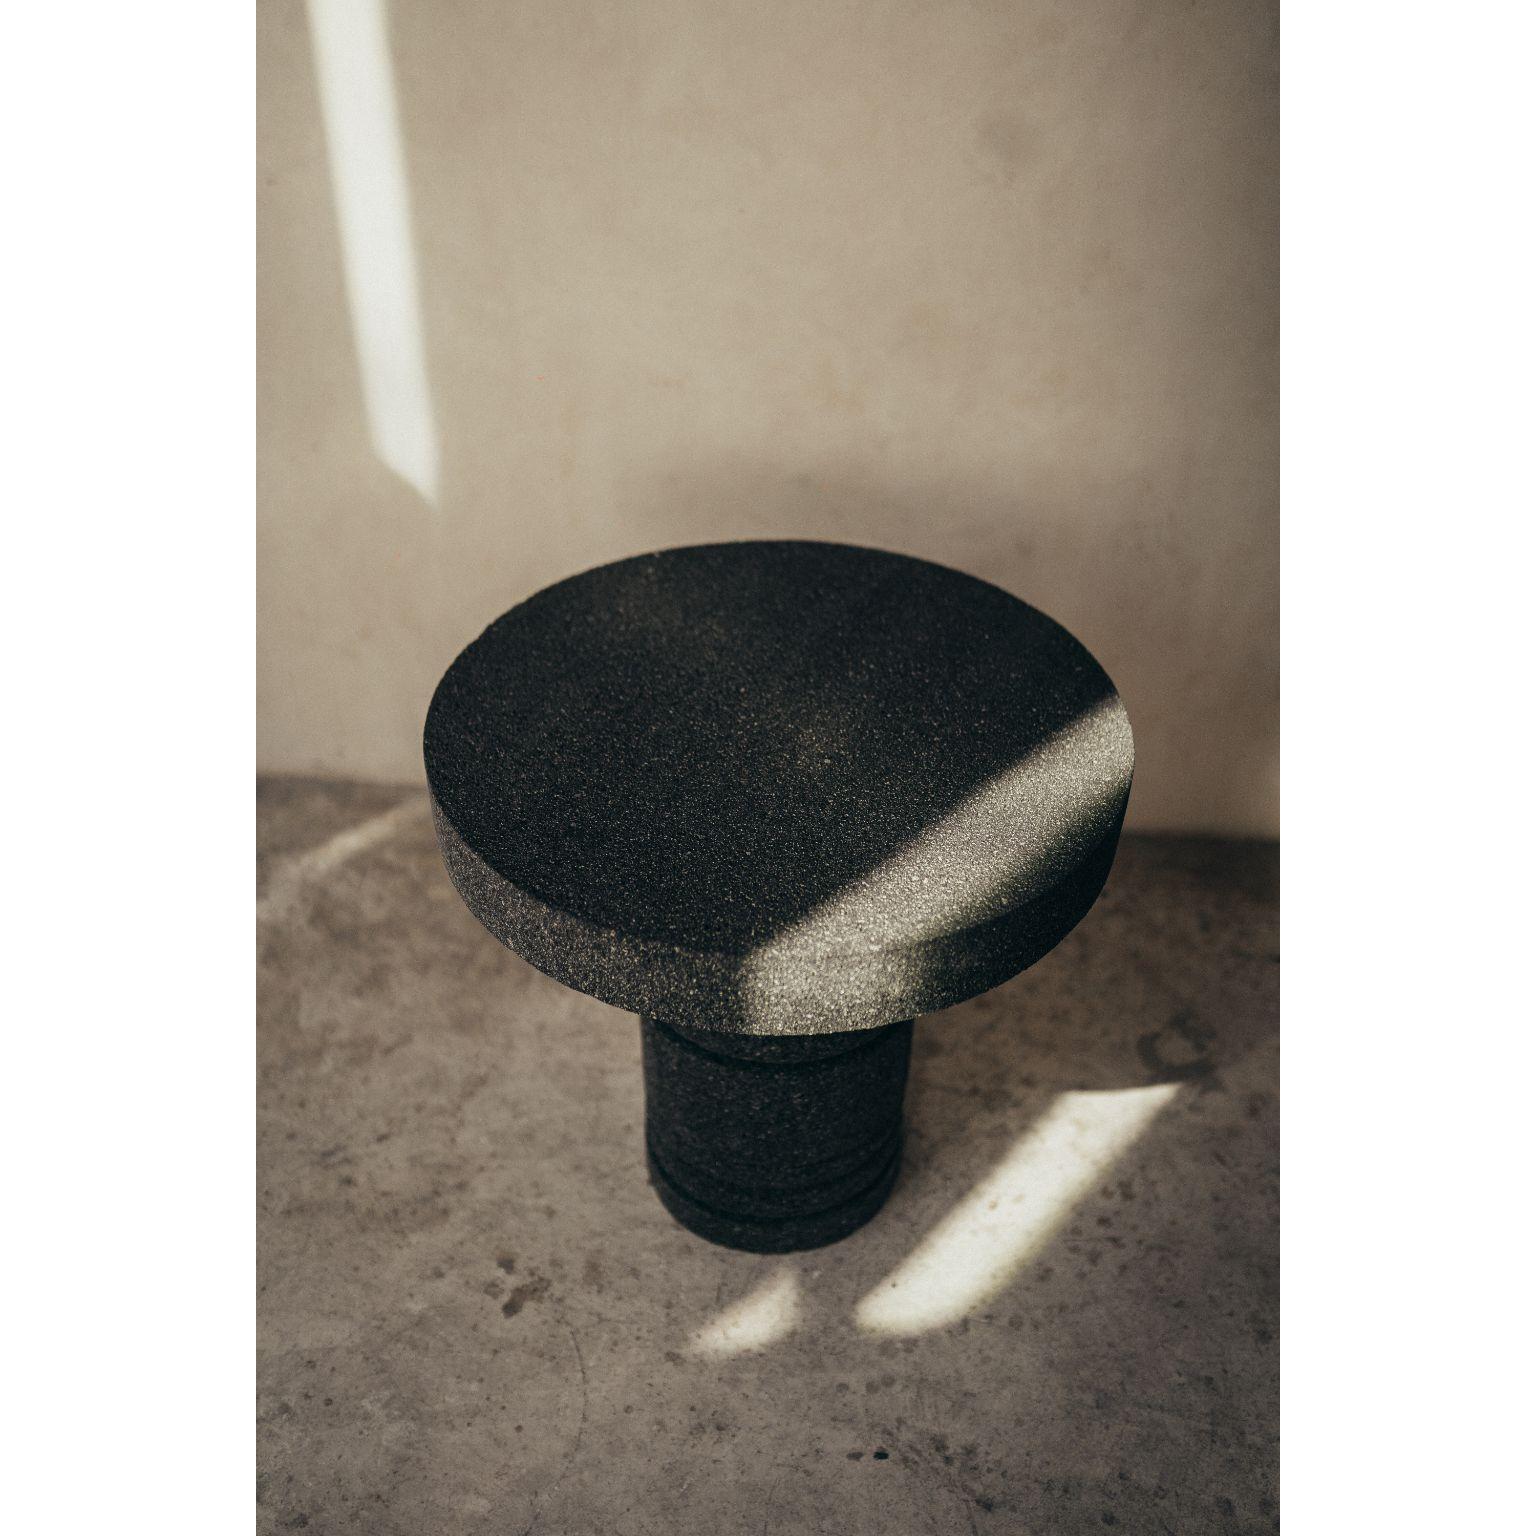 Volcanic Stone Totem by Daniel Orozco
Dimensions: D60 x H60 cm
Materials: Volcanic Stone

Daniel Orozco Estudio
We are an inclusive interior design estudio, who love to work with fabrics and natural textiles in makes our spaces sophisticated